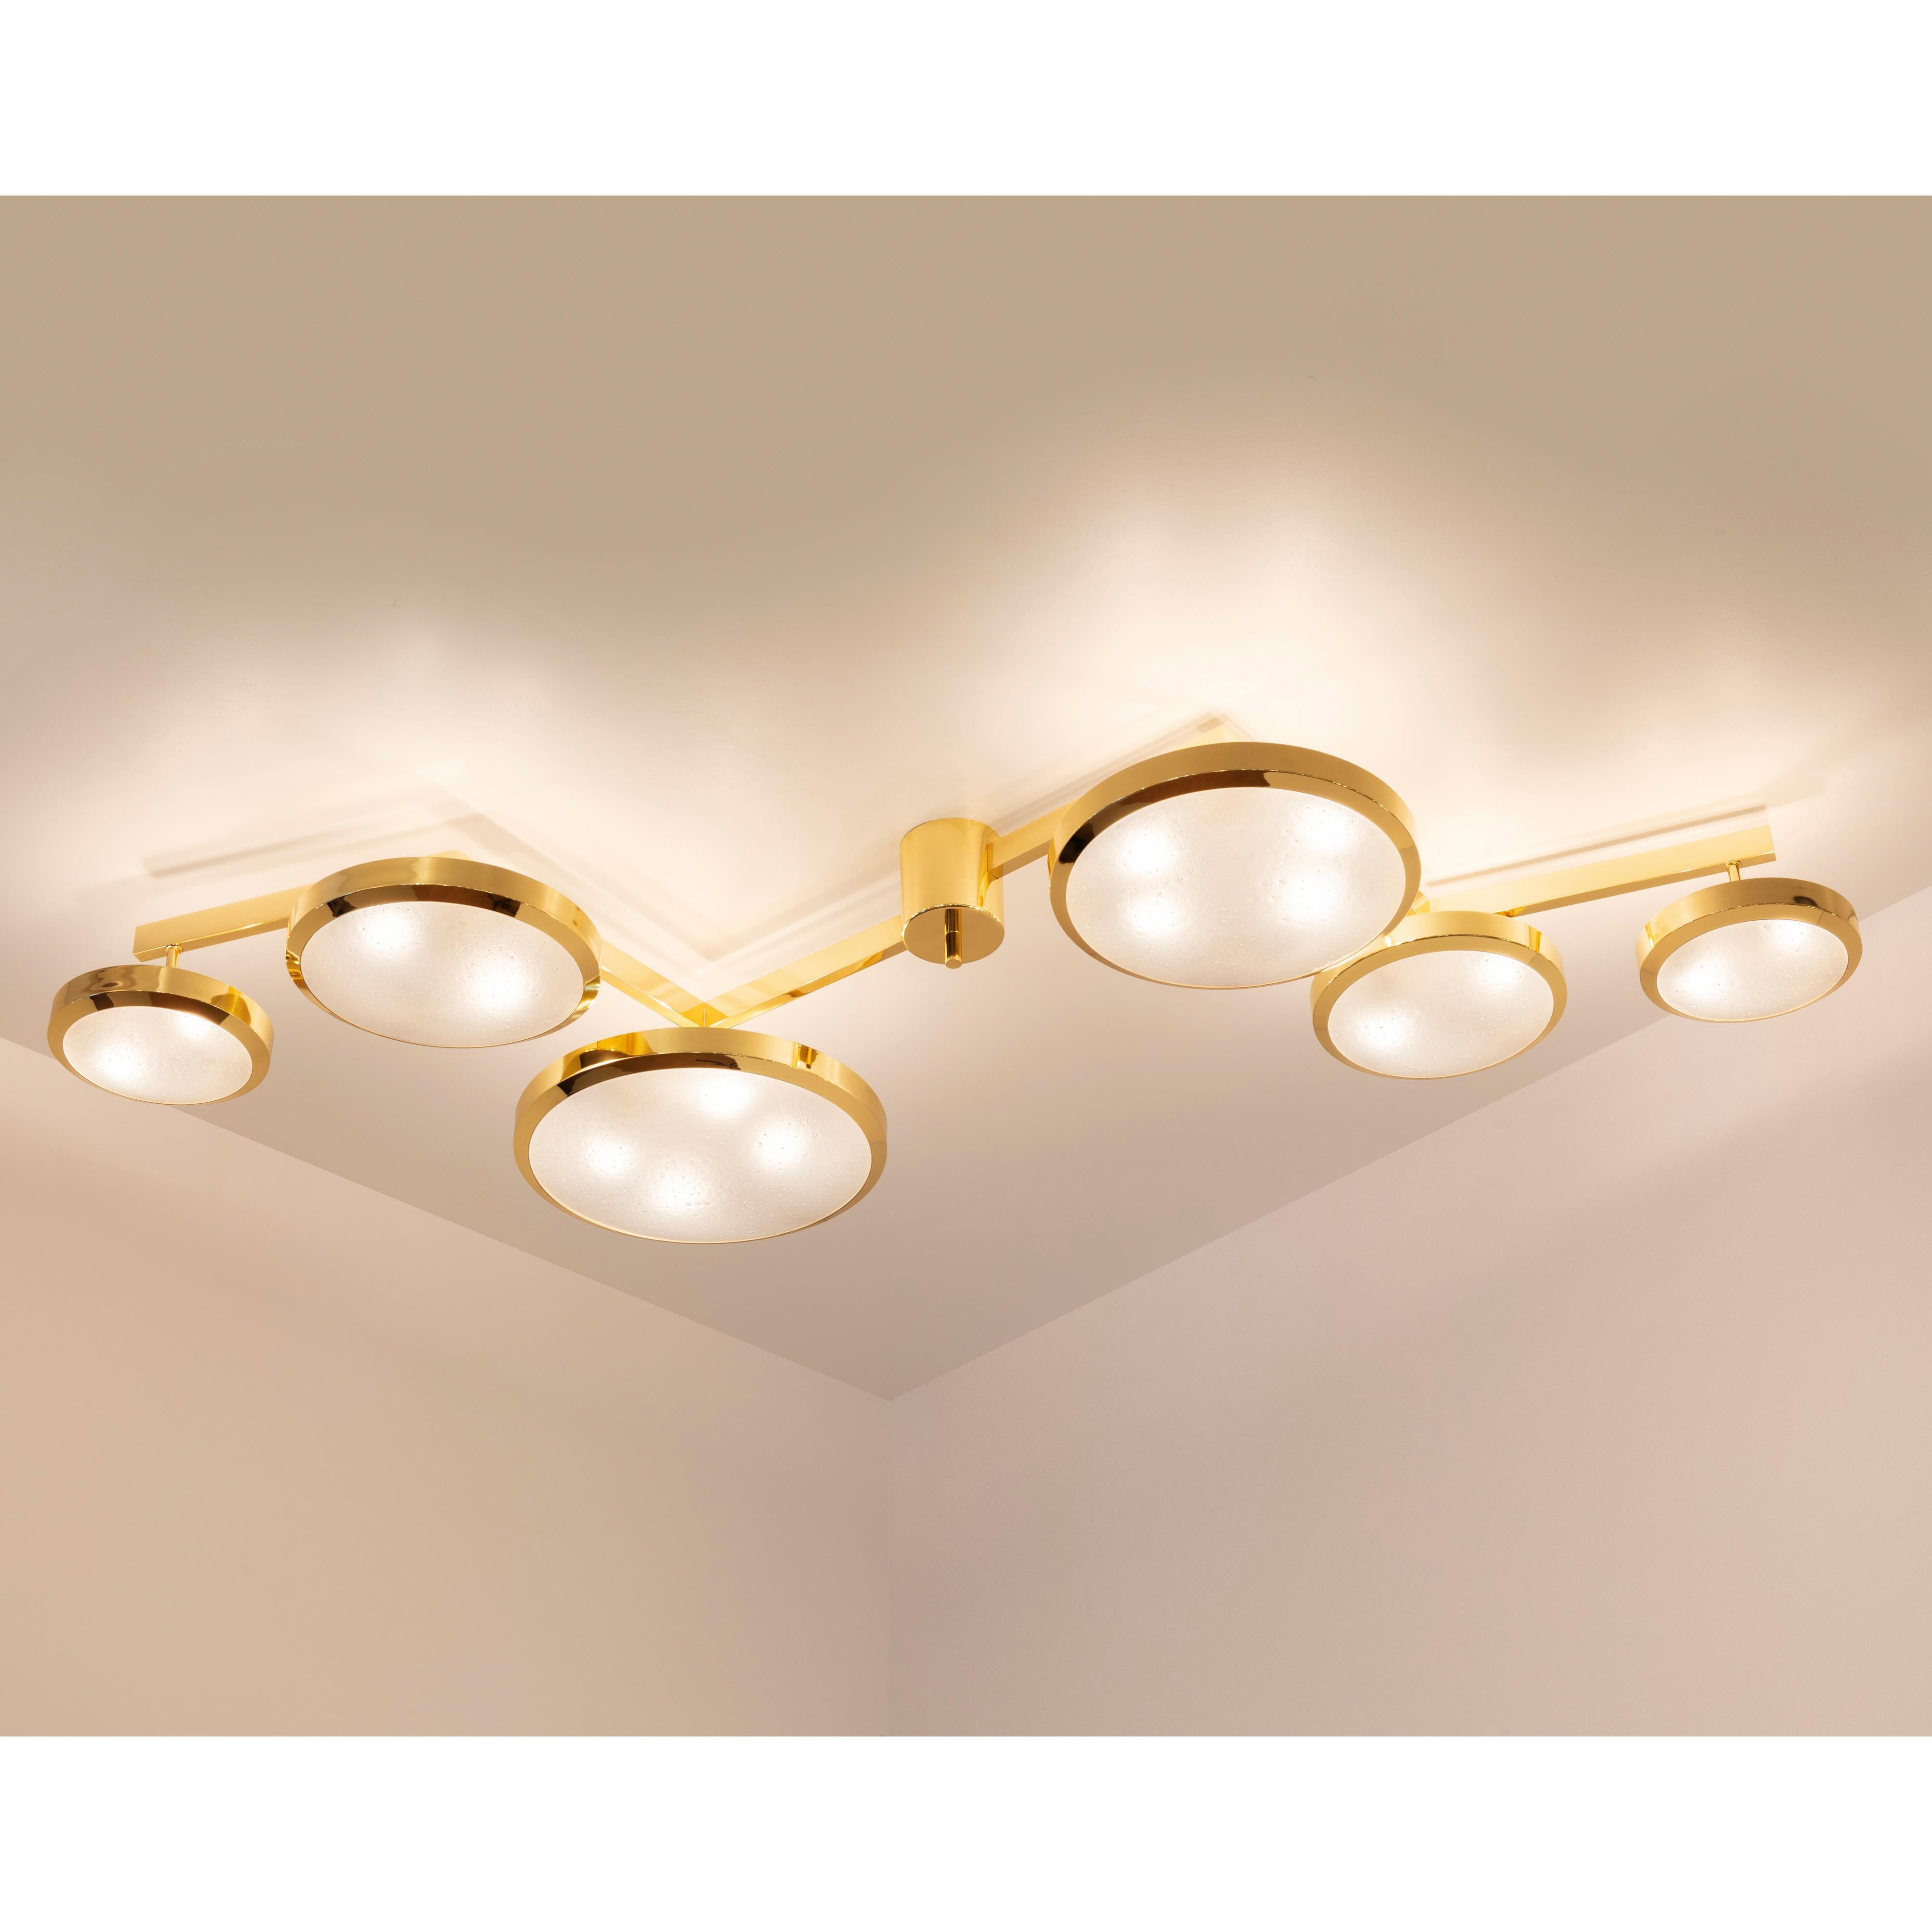 Geometria Sospesa Ceiling Light by Gaspare Asaro-Polished Brass Finish In New Condition For Sale In New York, NY